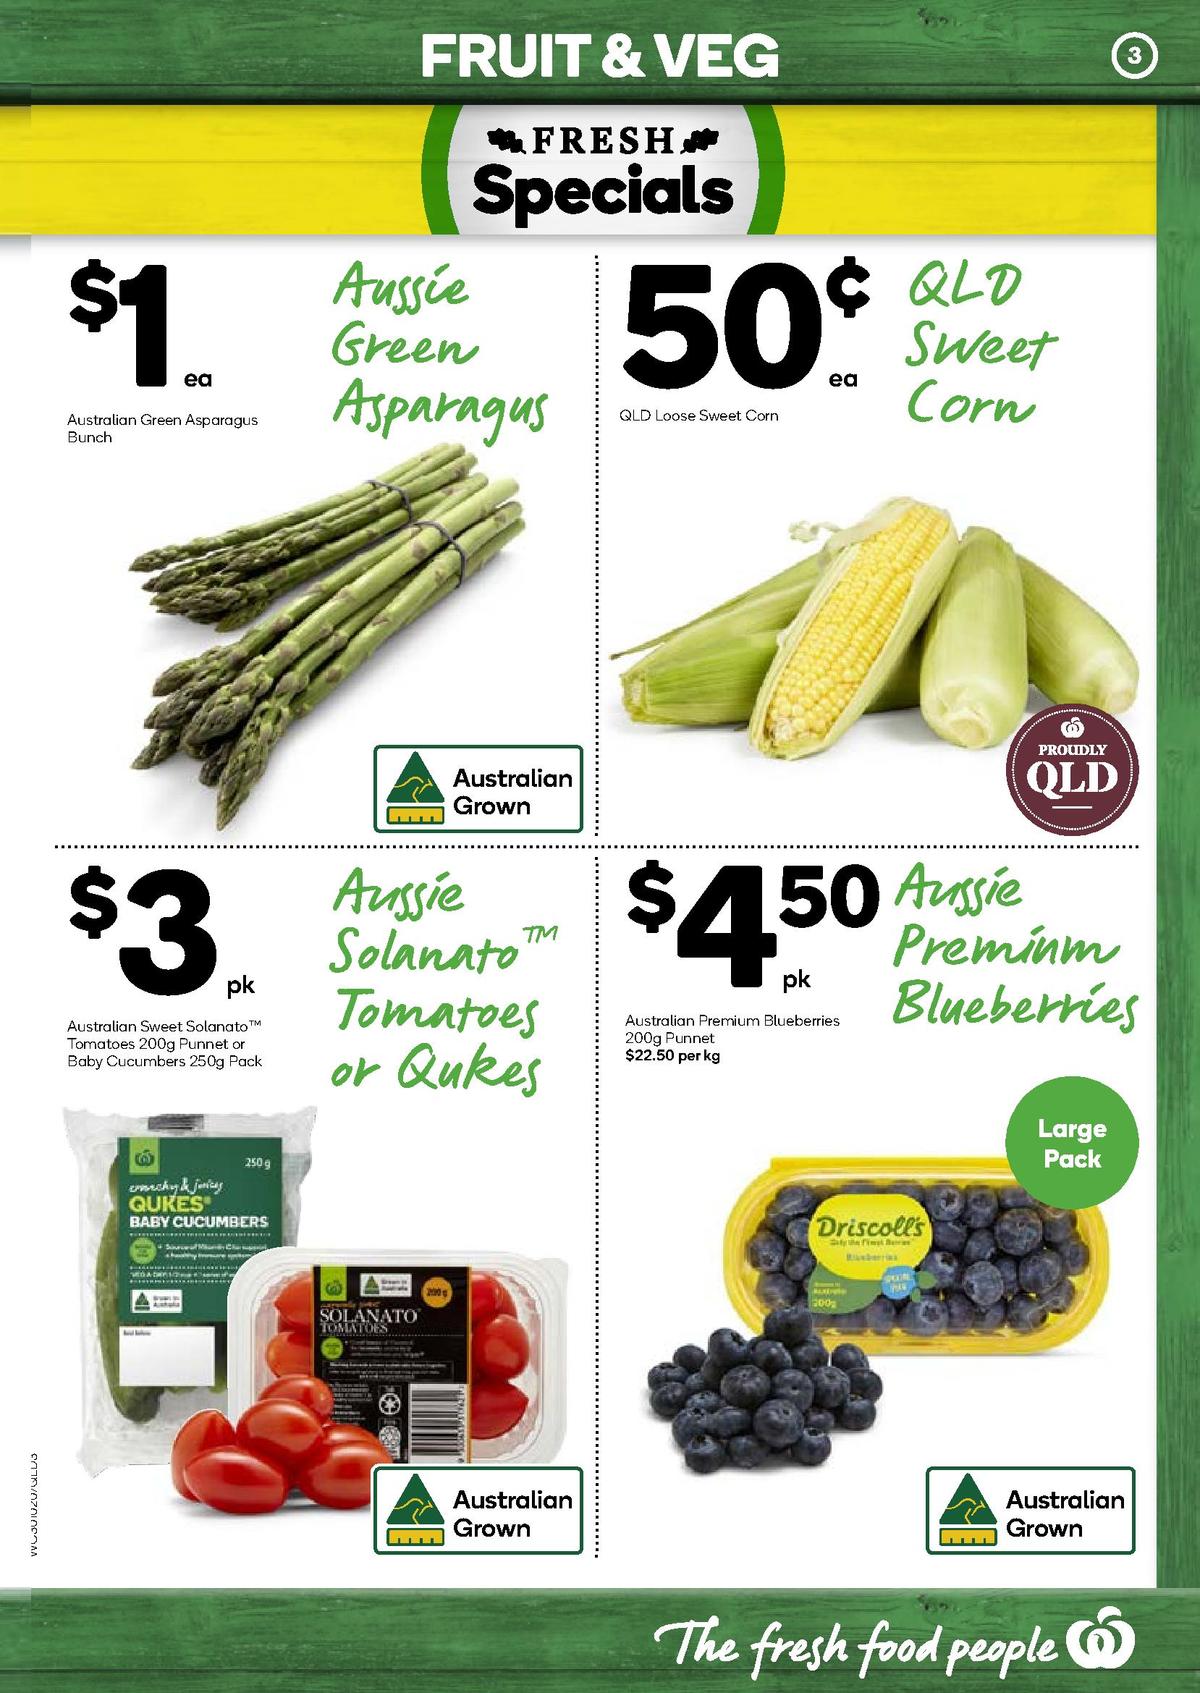 Woolworths Catalogues from 30 October